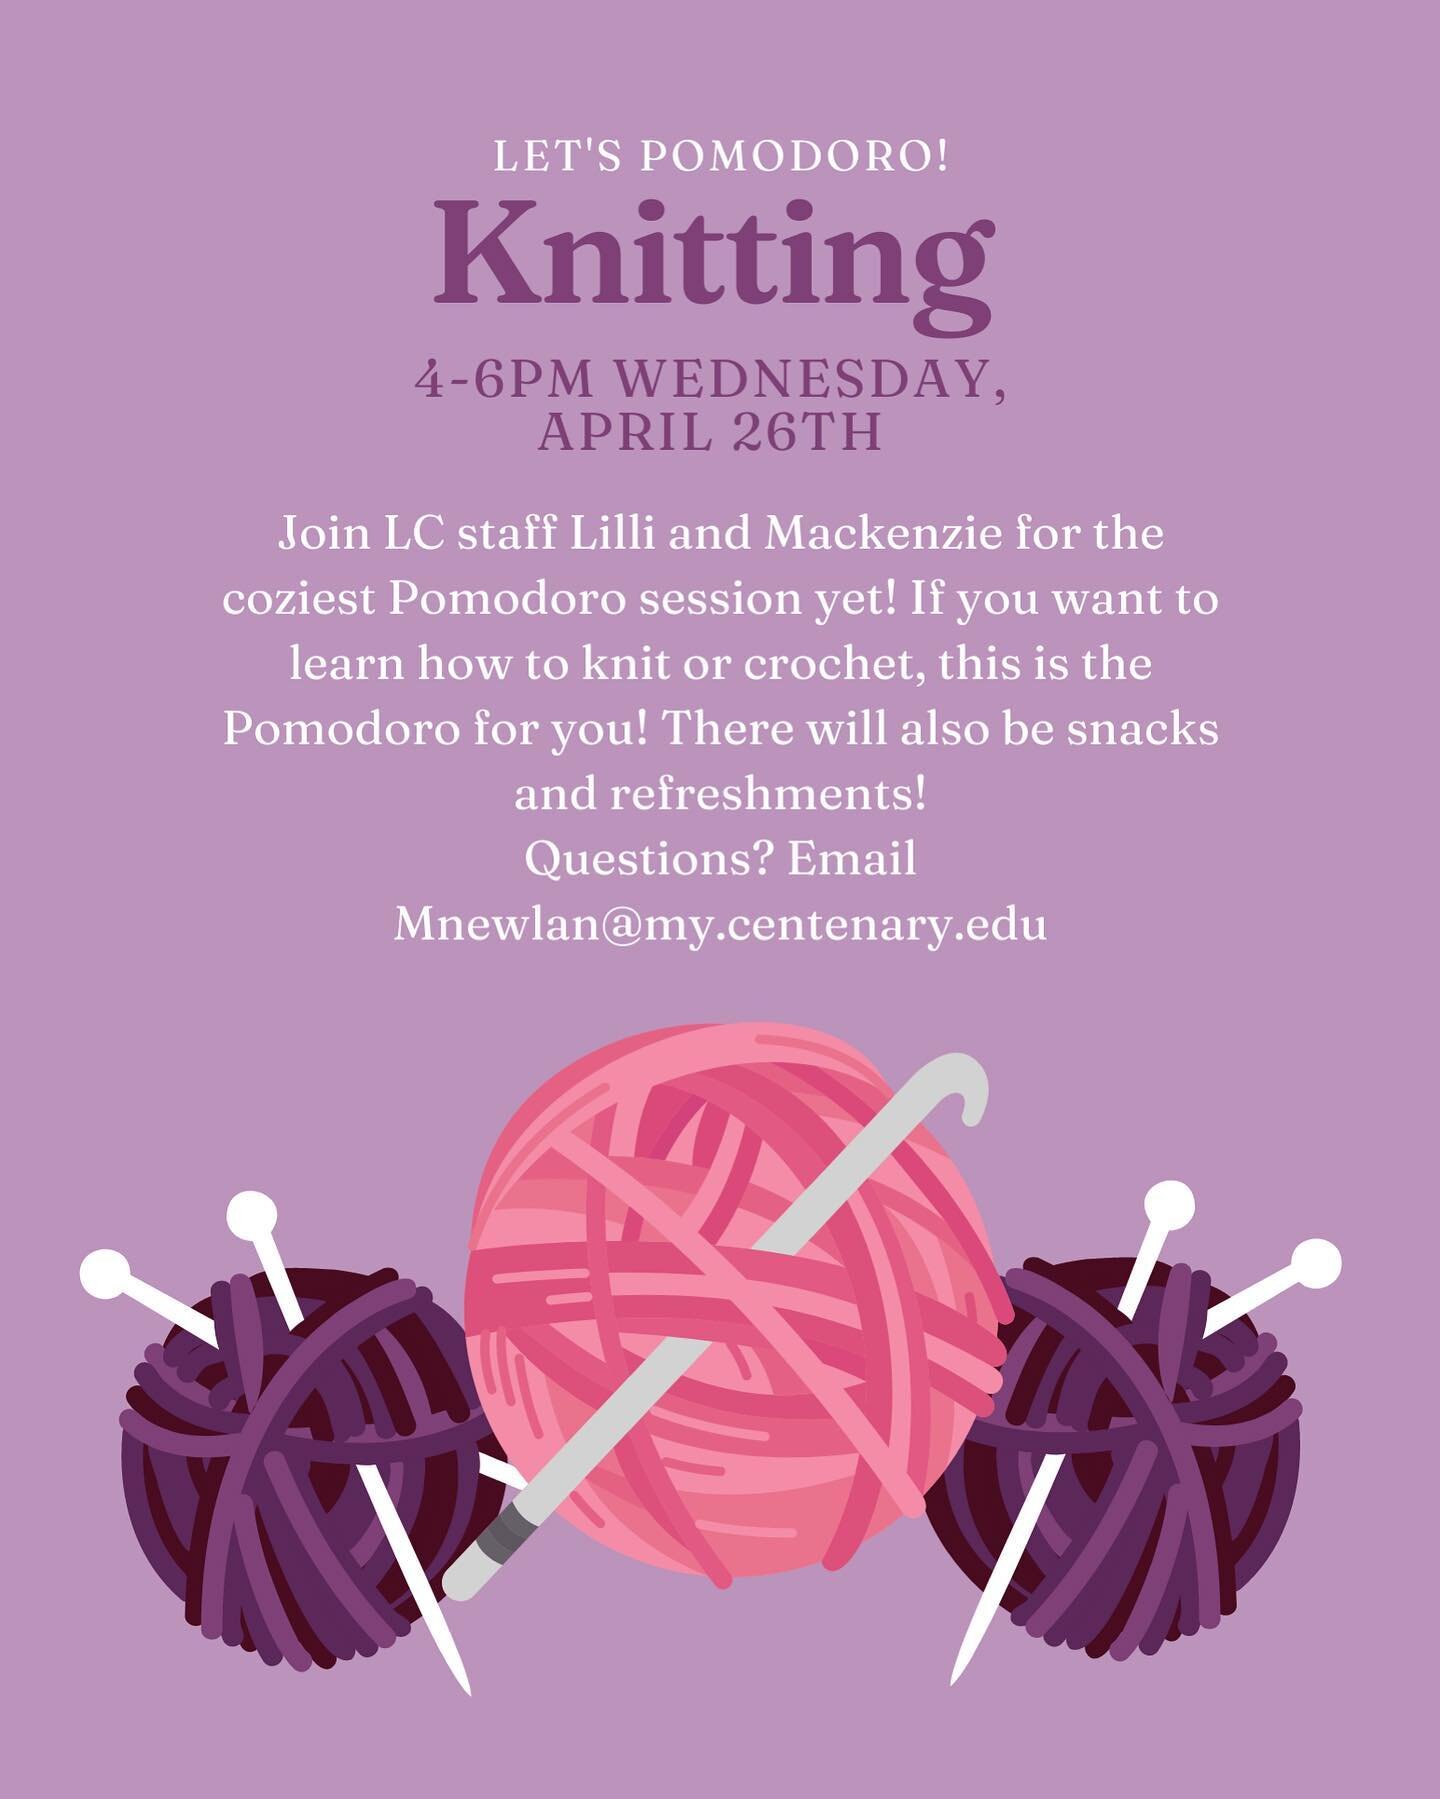 The coziest Pomodoro session so far will be hosted by Mackenzie and Lilli! Come learn how to knit or crochet during the study breaks! 🧶